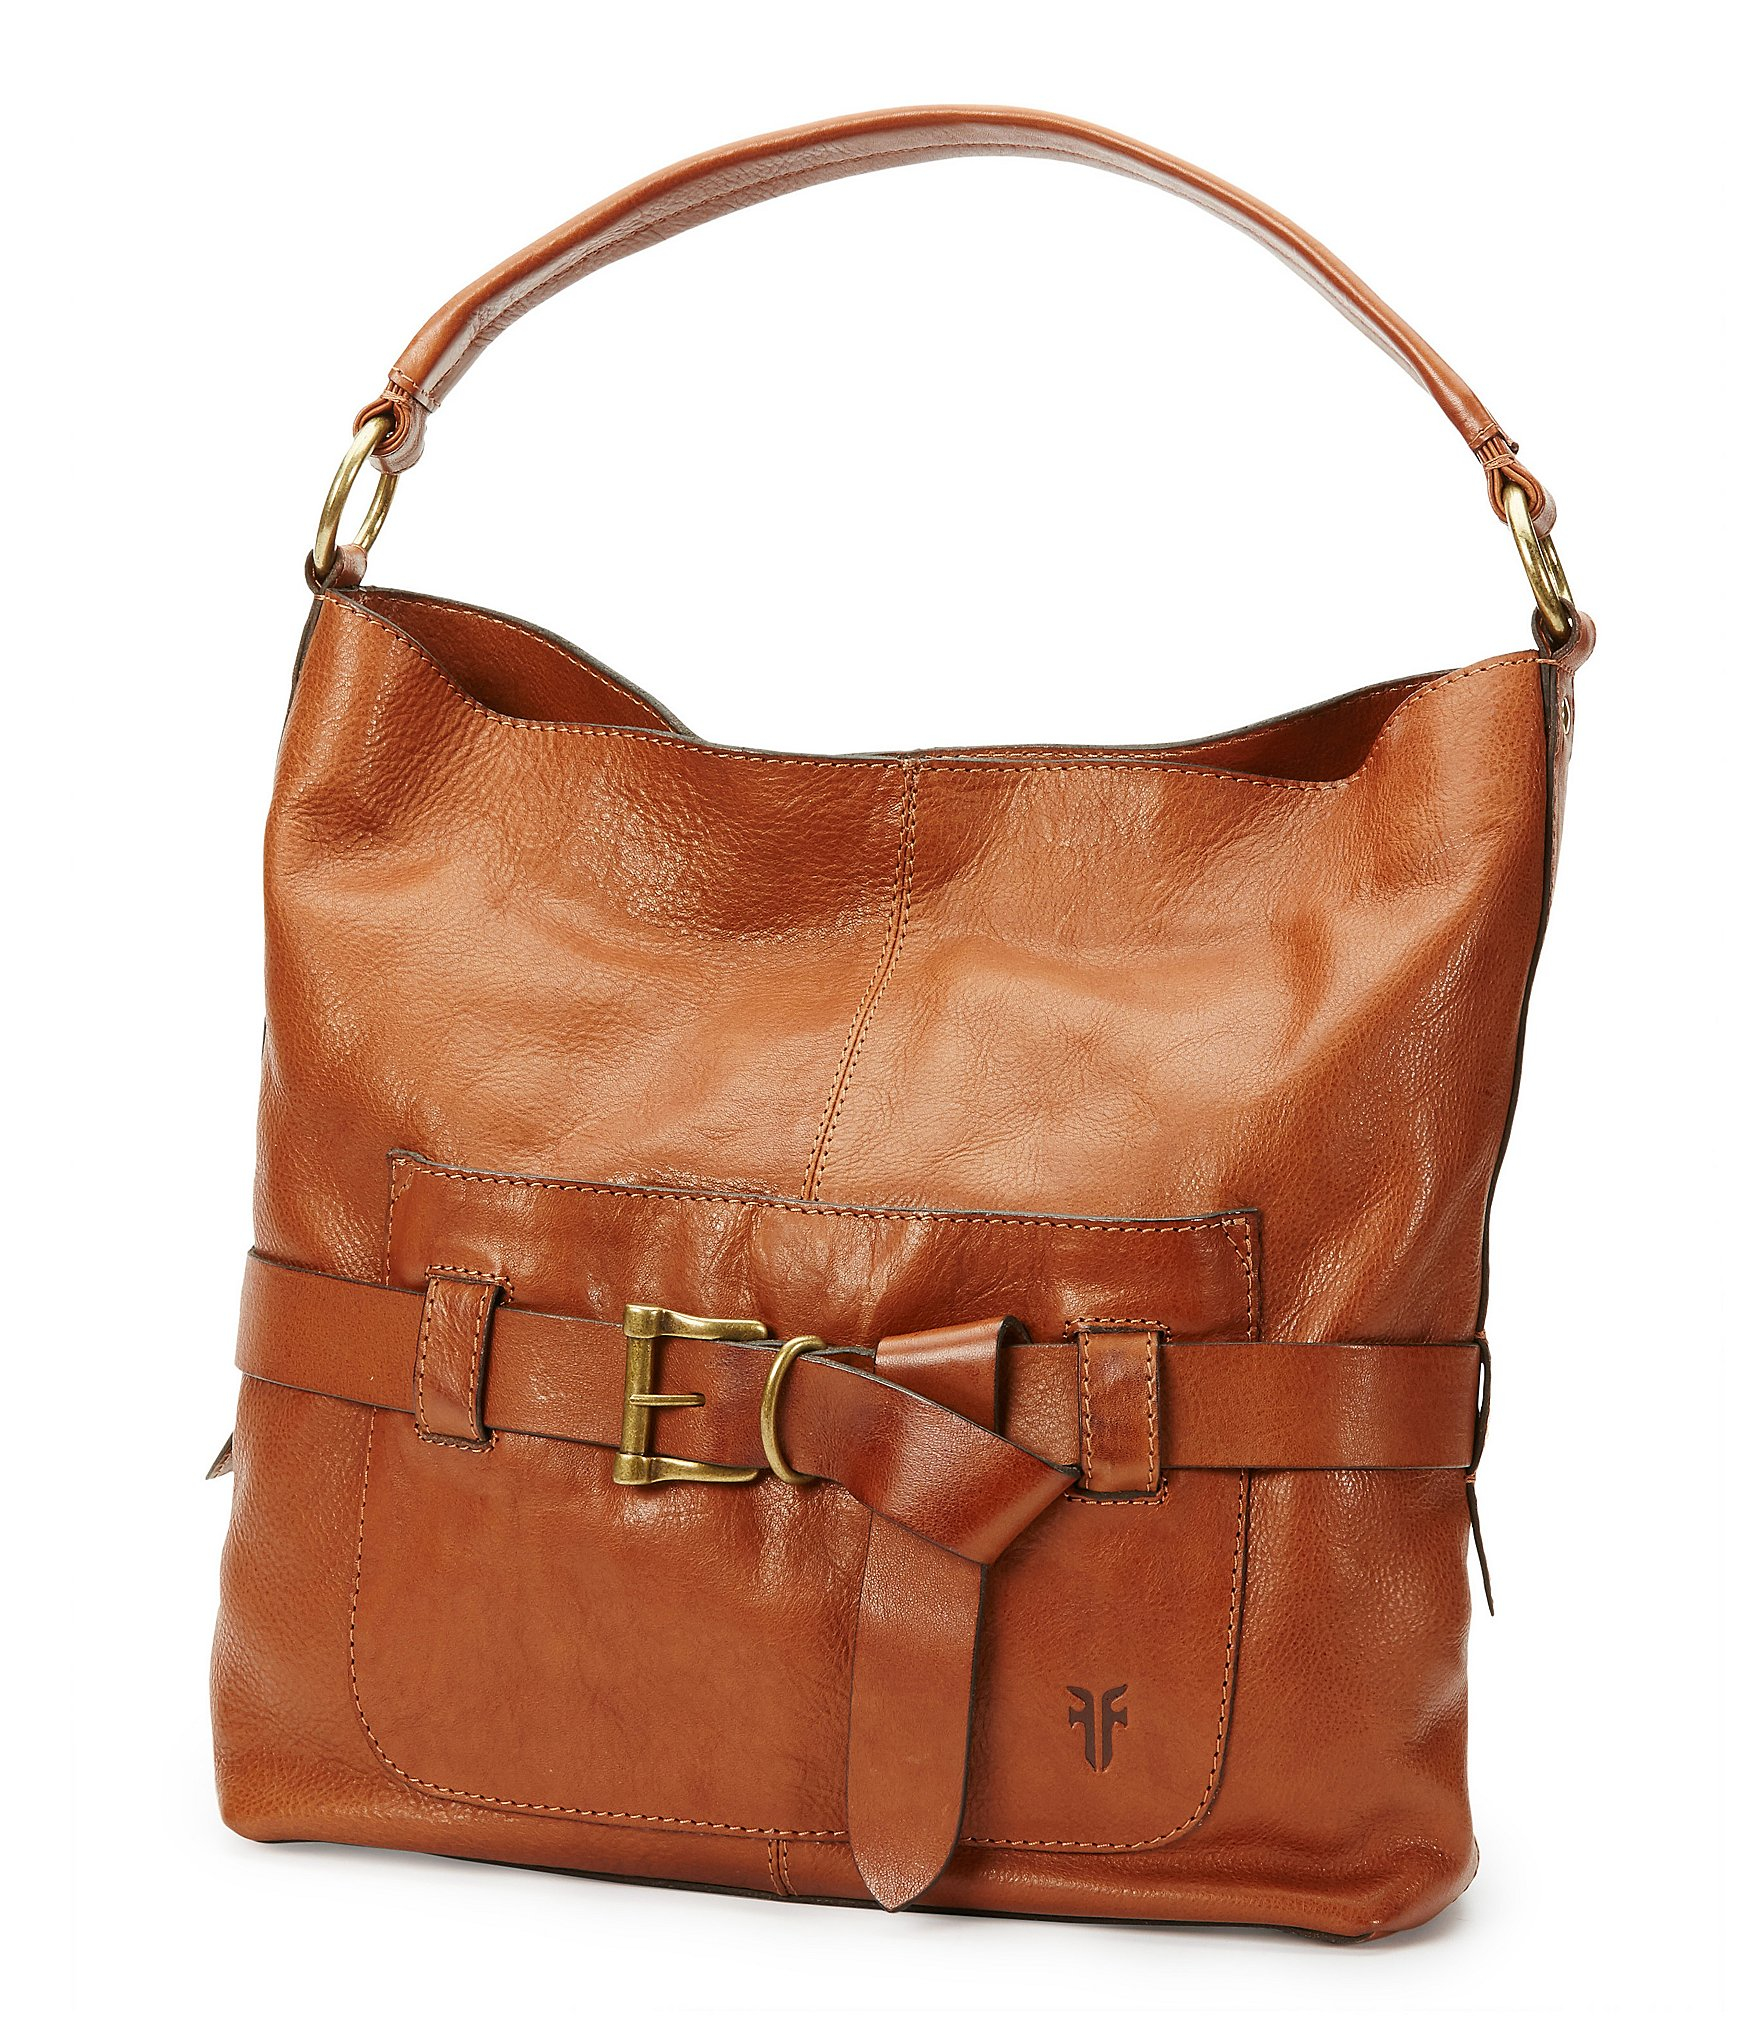 Lyst - Frye Kayla Knotted Hobo Bag in Brown